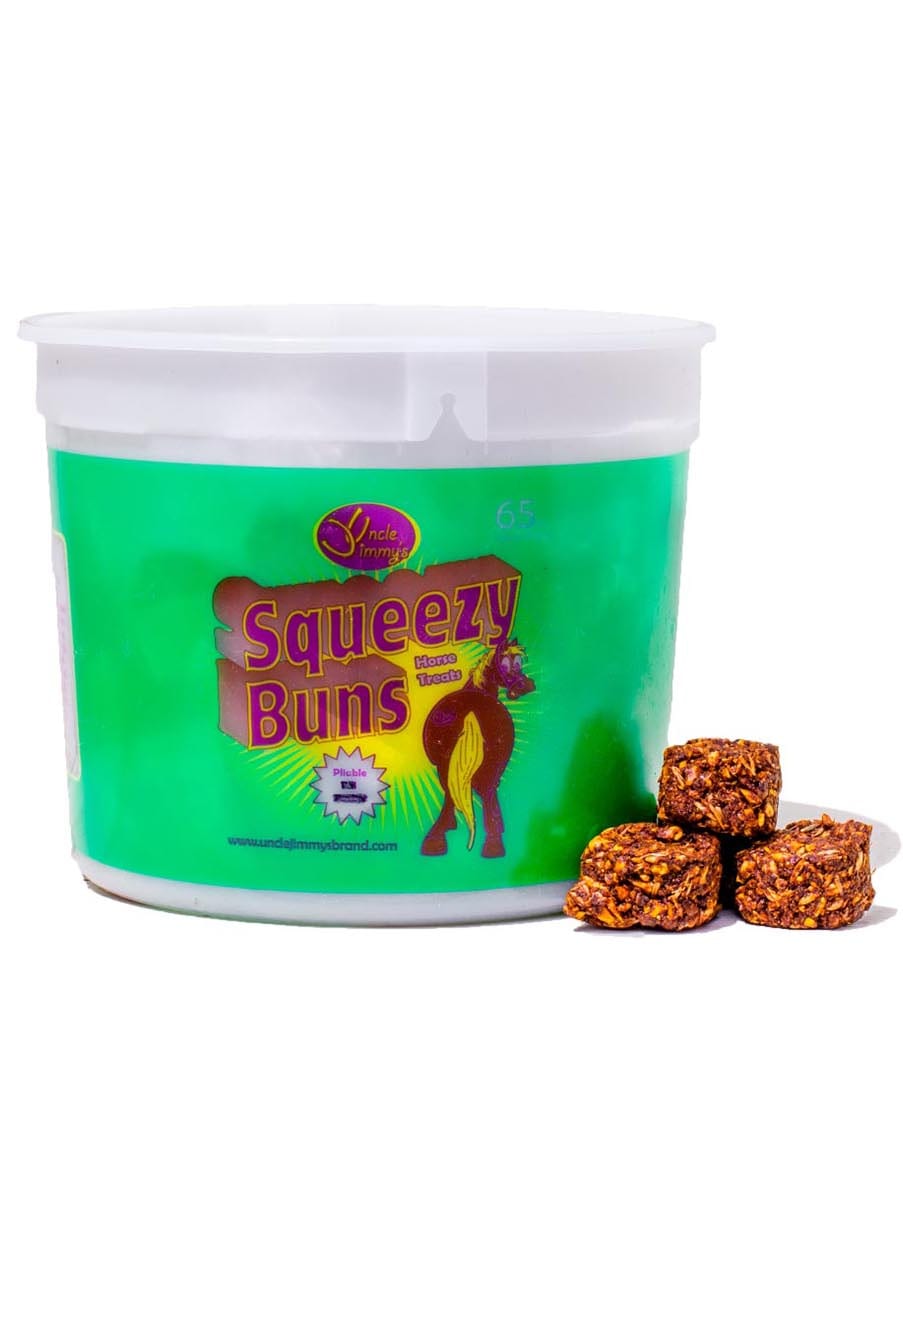 Uncle Jimmy's Squeezy Buns- 3 lbs